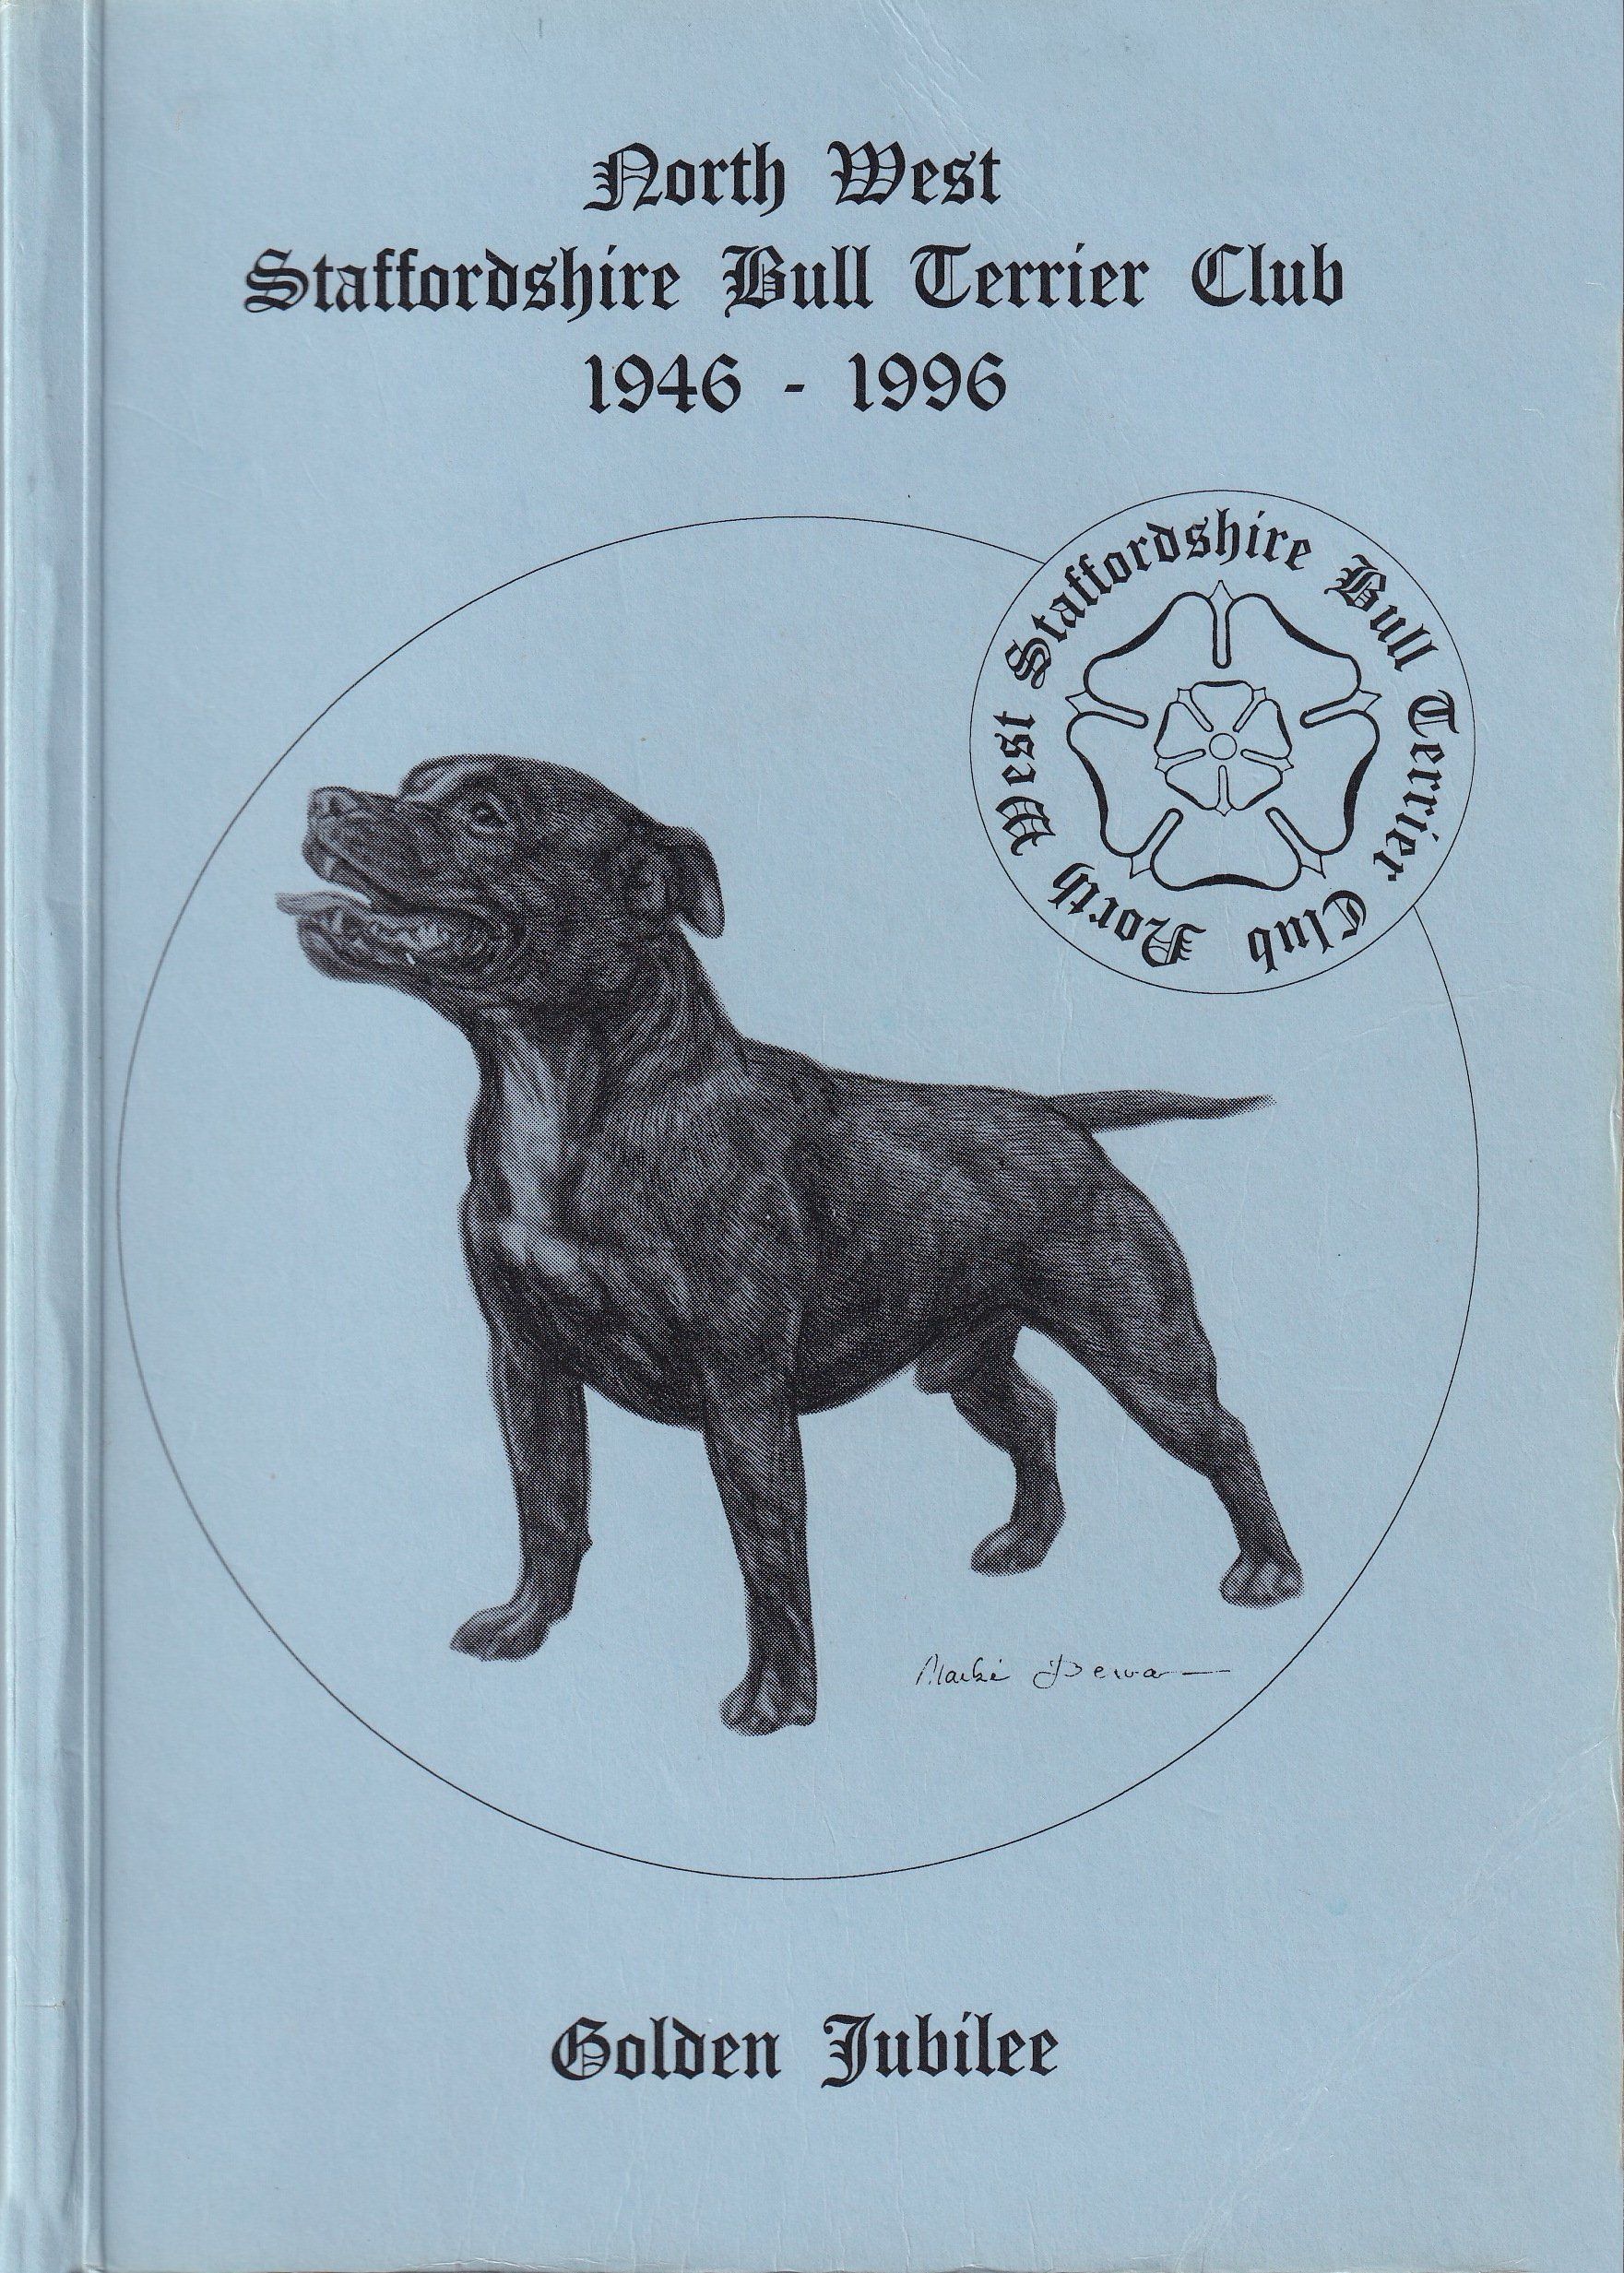 North West Staffordshire Bull Terrier Club 1946-1996 Year Book Golden Jubilee